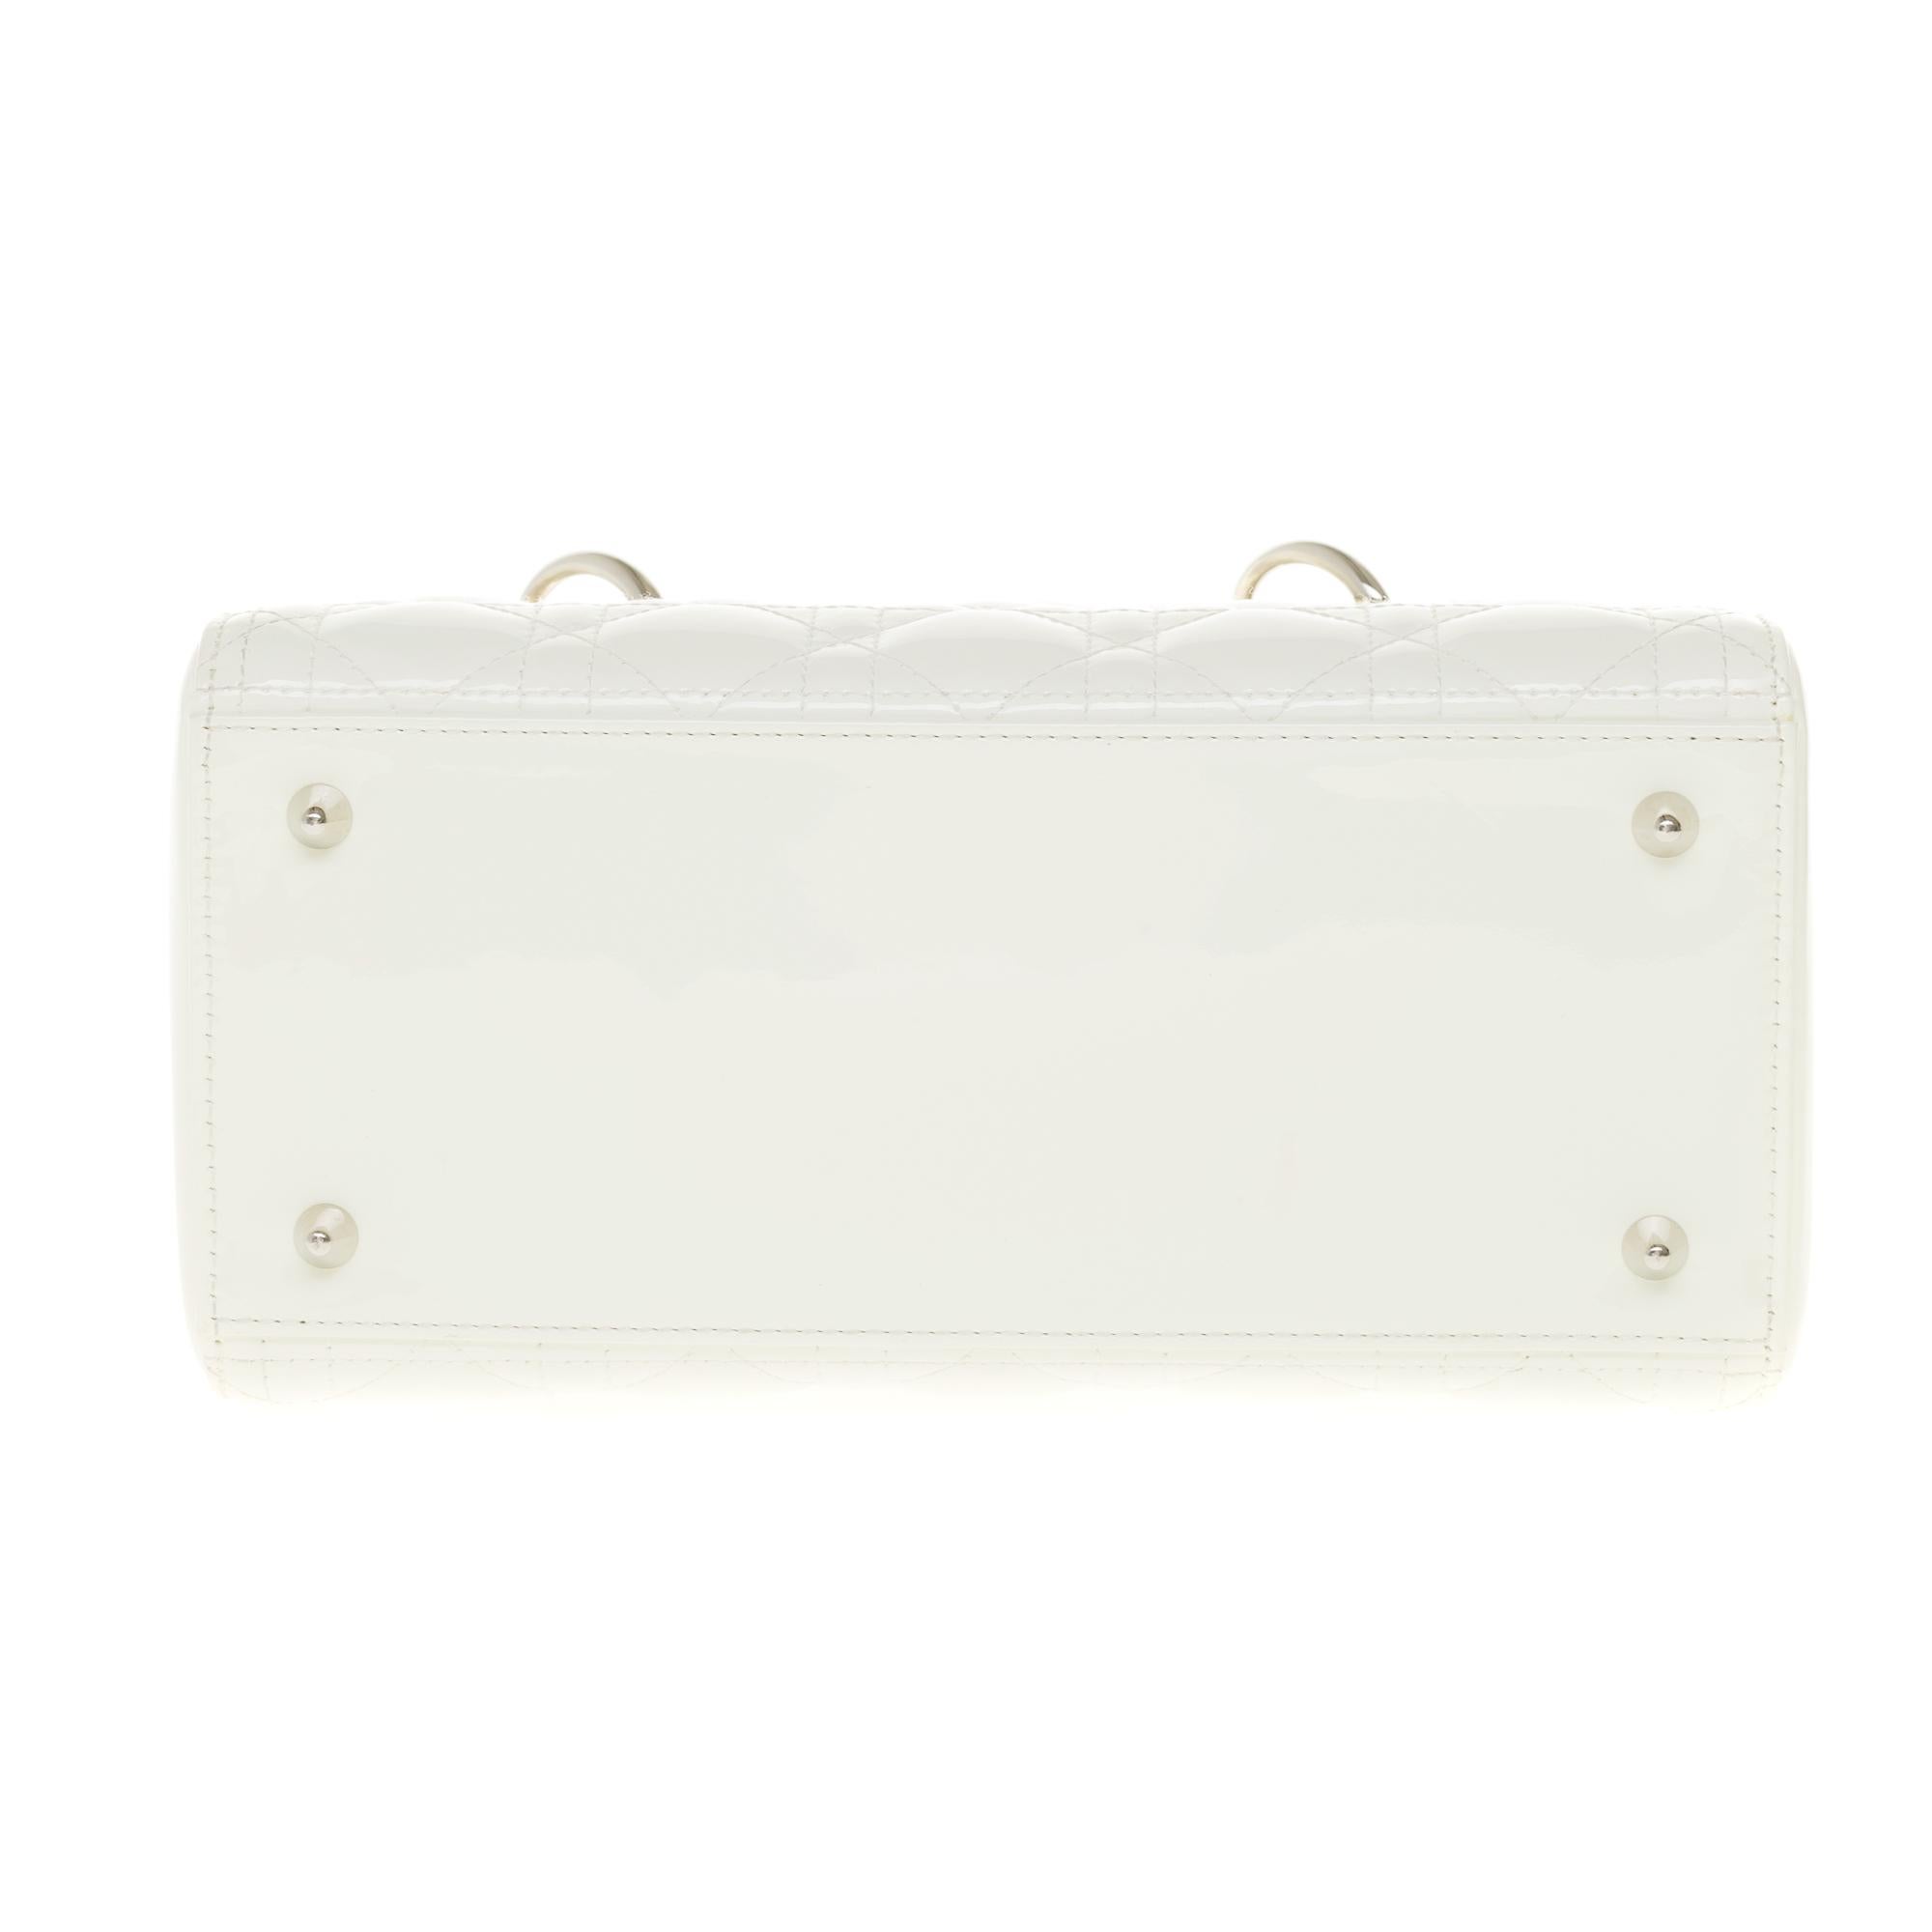  Christian Dior Lady Dior shoulder bag in white patent cannage leather, SHW 2